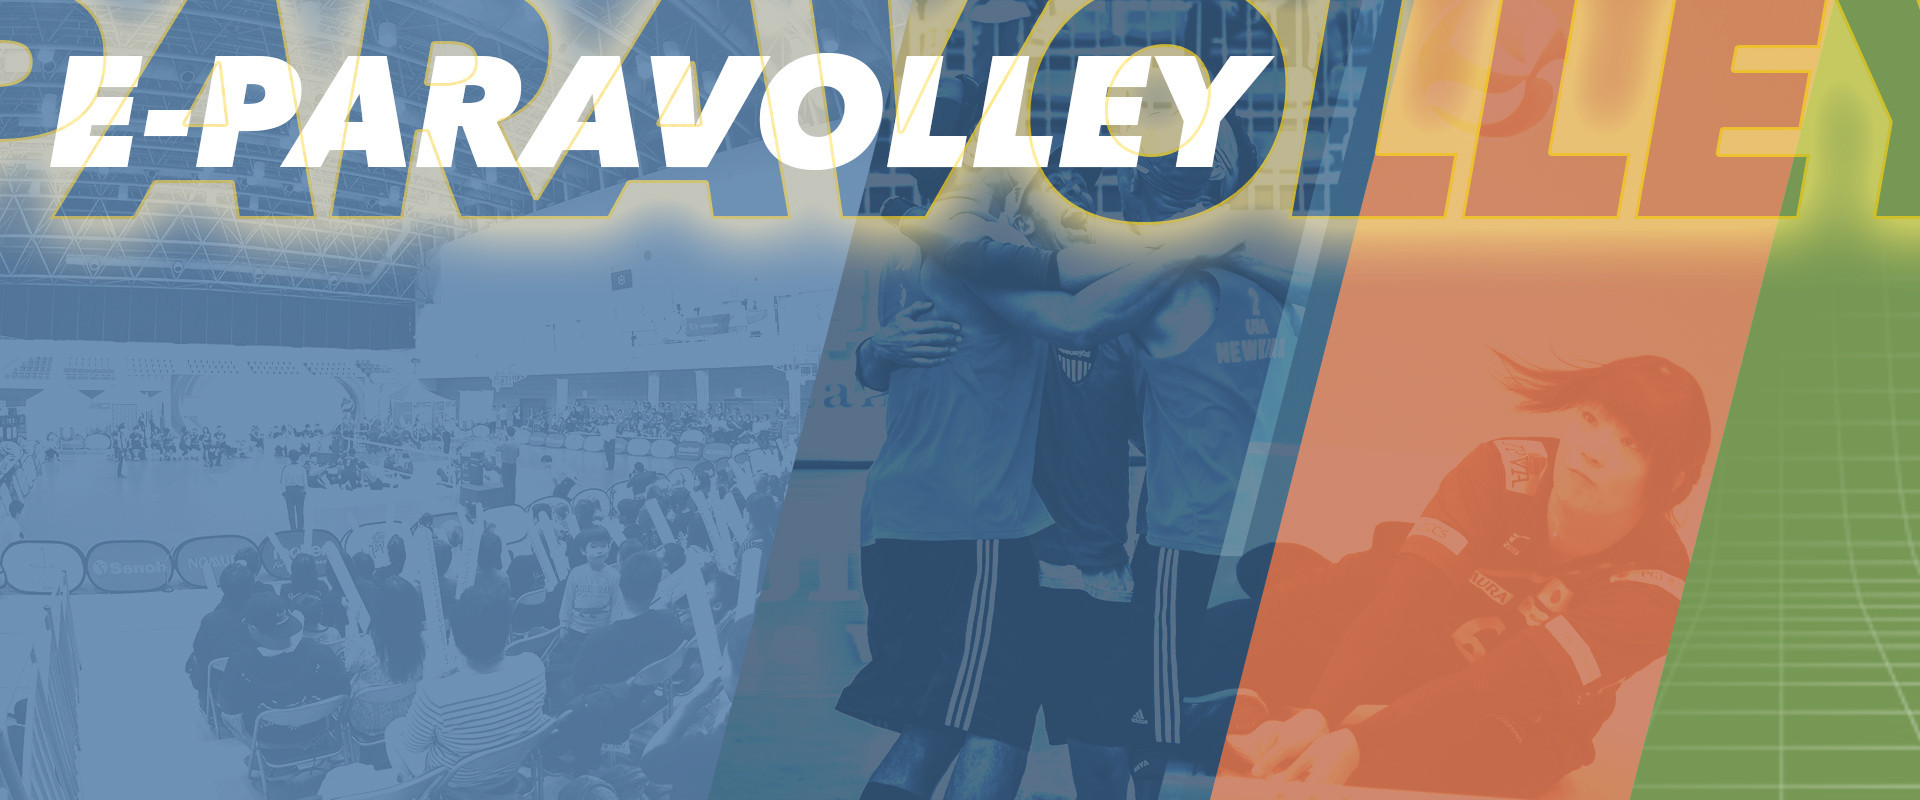 E-ParaVolley was launched yesterday ©World ParaVolley